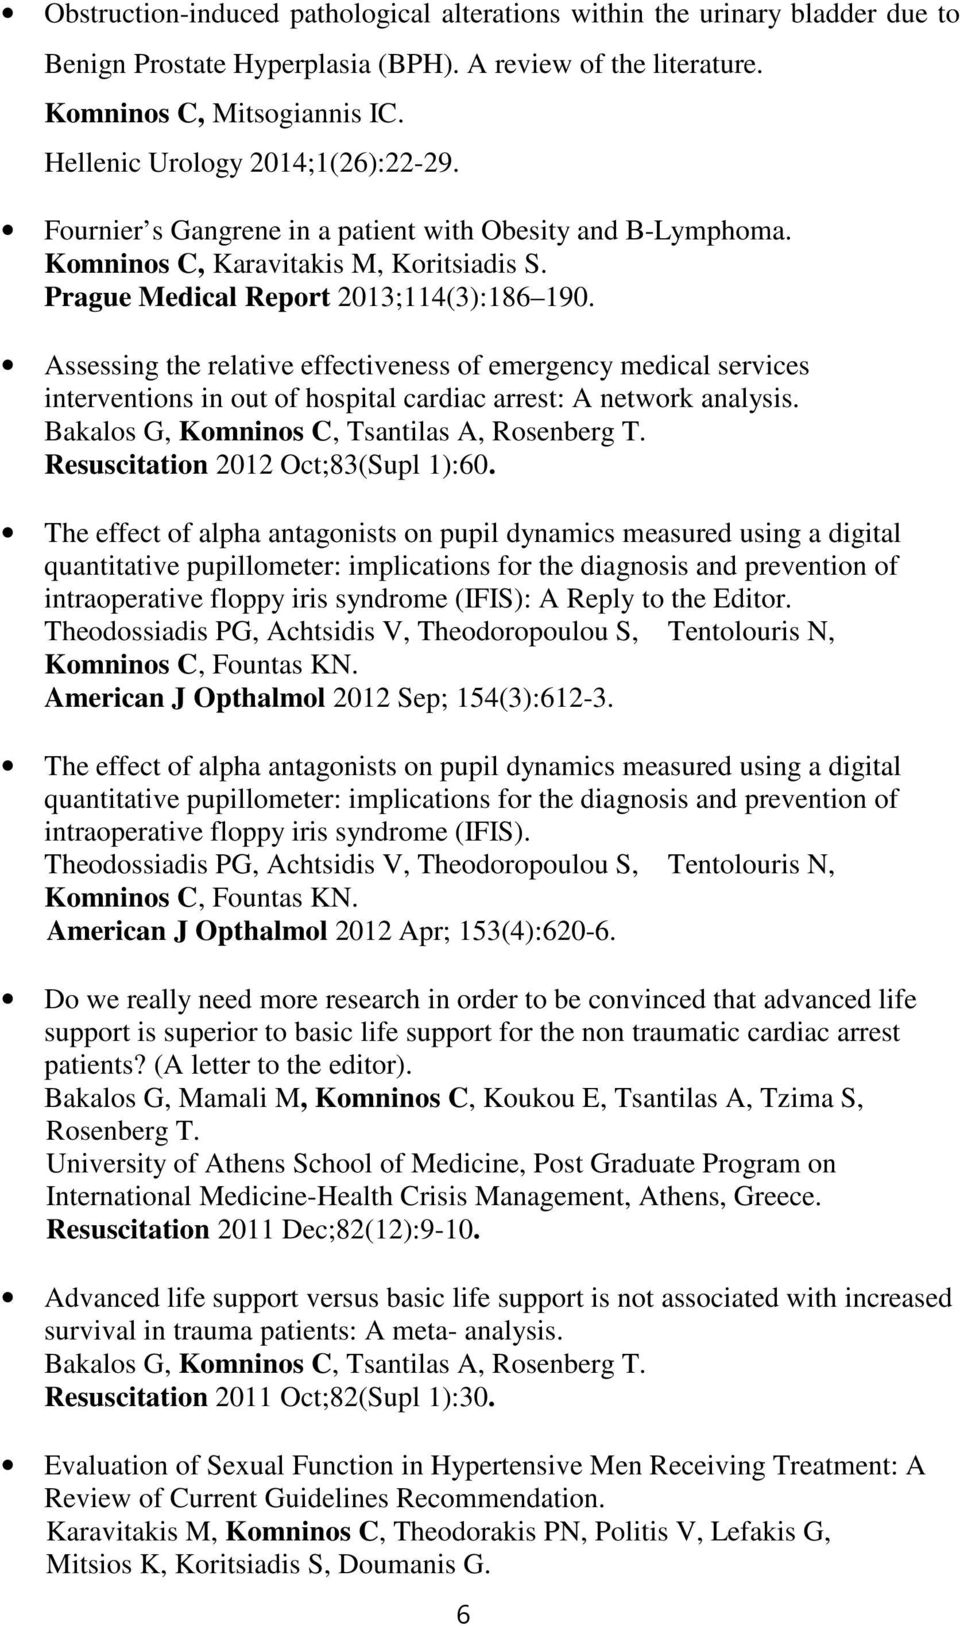 Assessing the relative effectiveness of emergency medical services interventions in out of hospital cardiac arrest: A network analysis. Bakalos G, Komninos C, Tsantilas A, Rosenberg T.